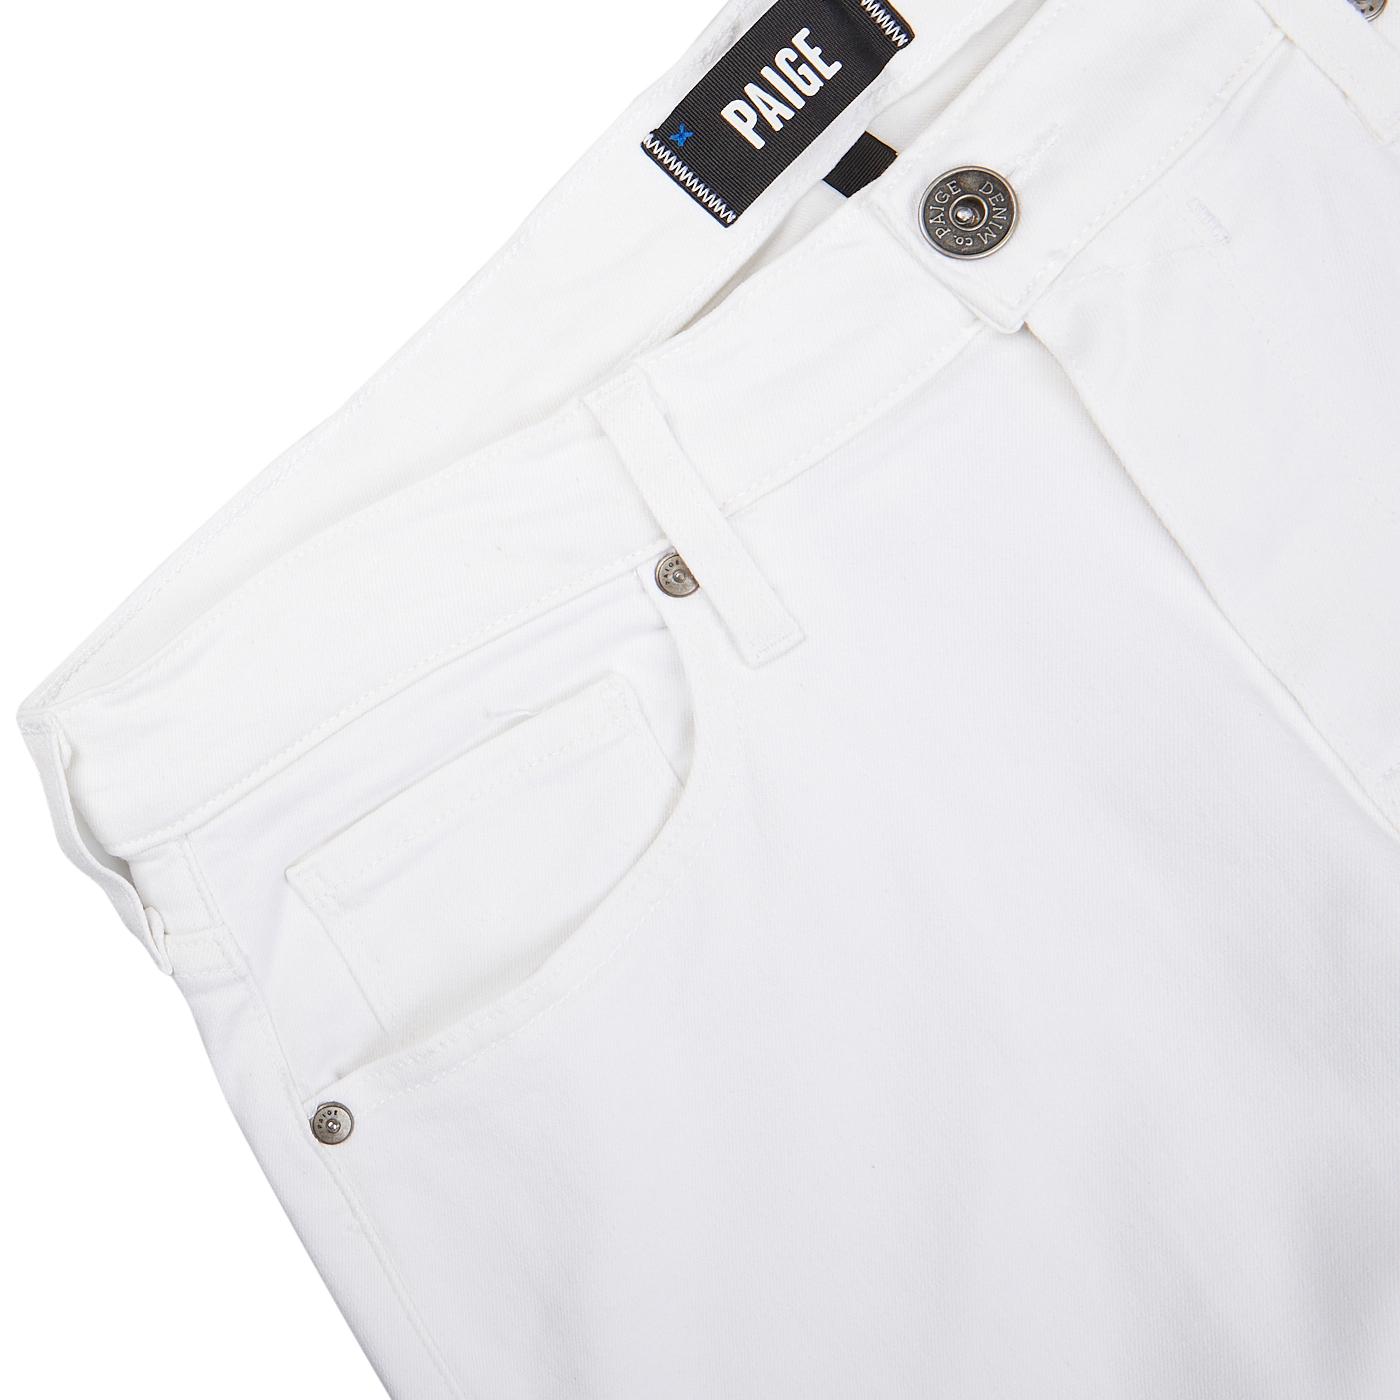 Close-up view of a white pair of Icecap White Cotton Transcend Federal Slim Jeans with a "Paige" brand label.